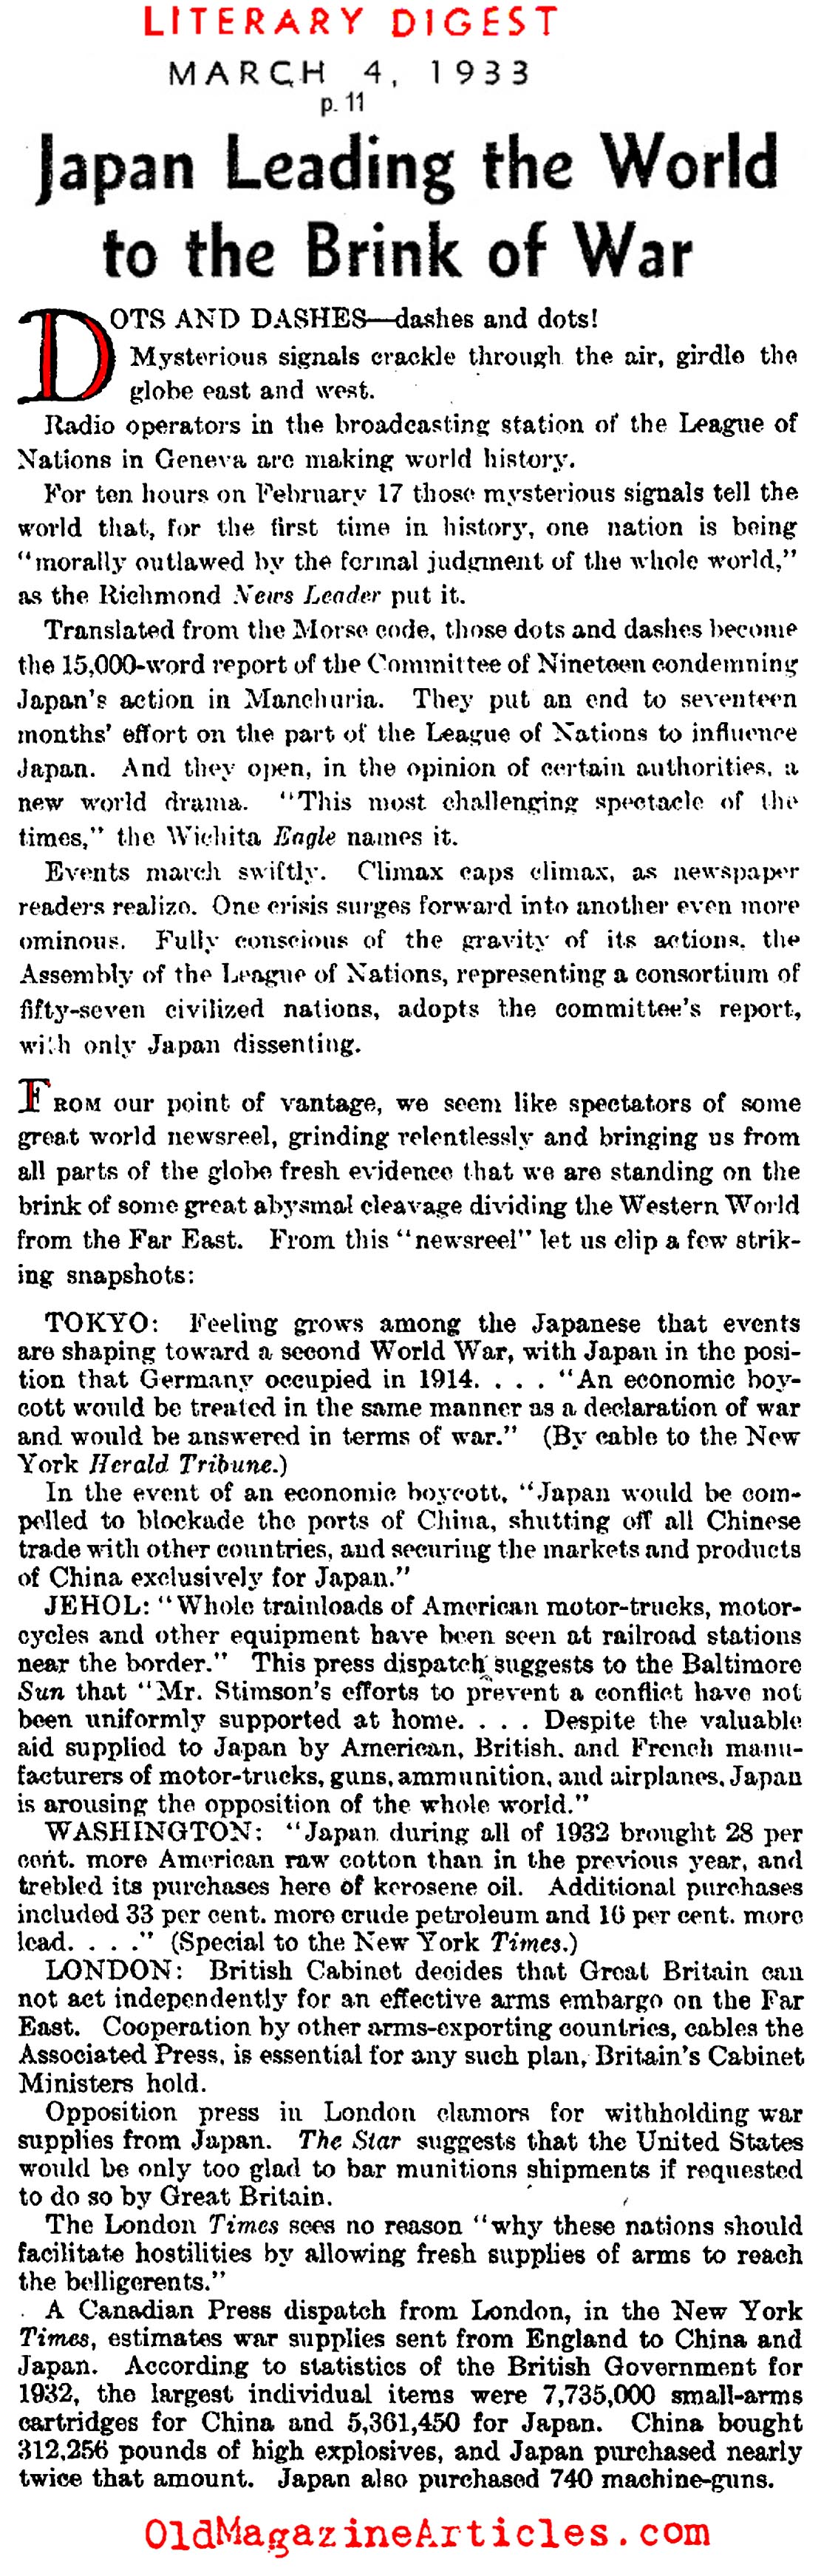 Japan and the Road to War (Literary Digest, 1933)